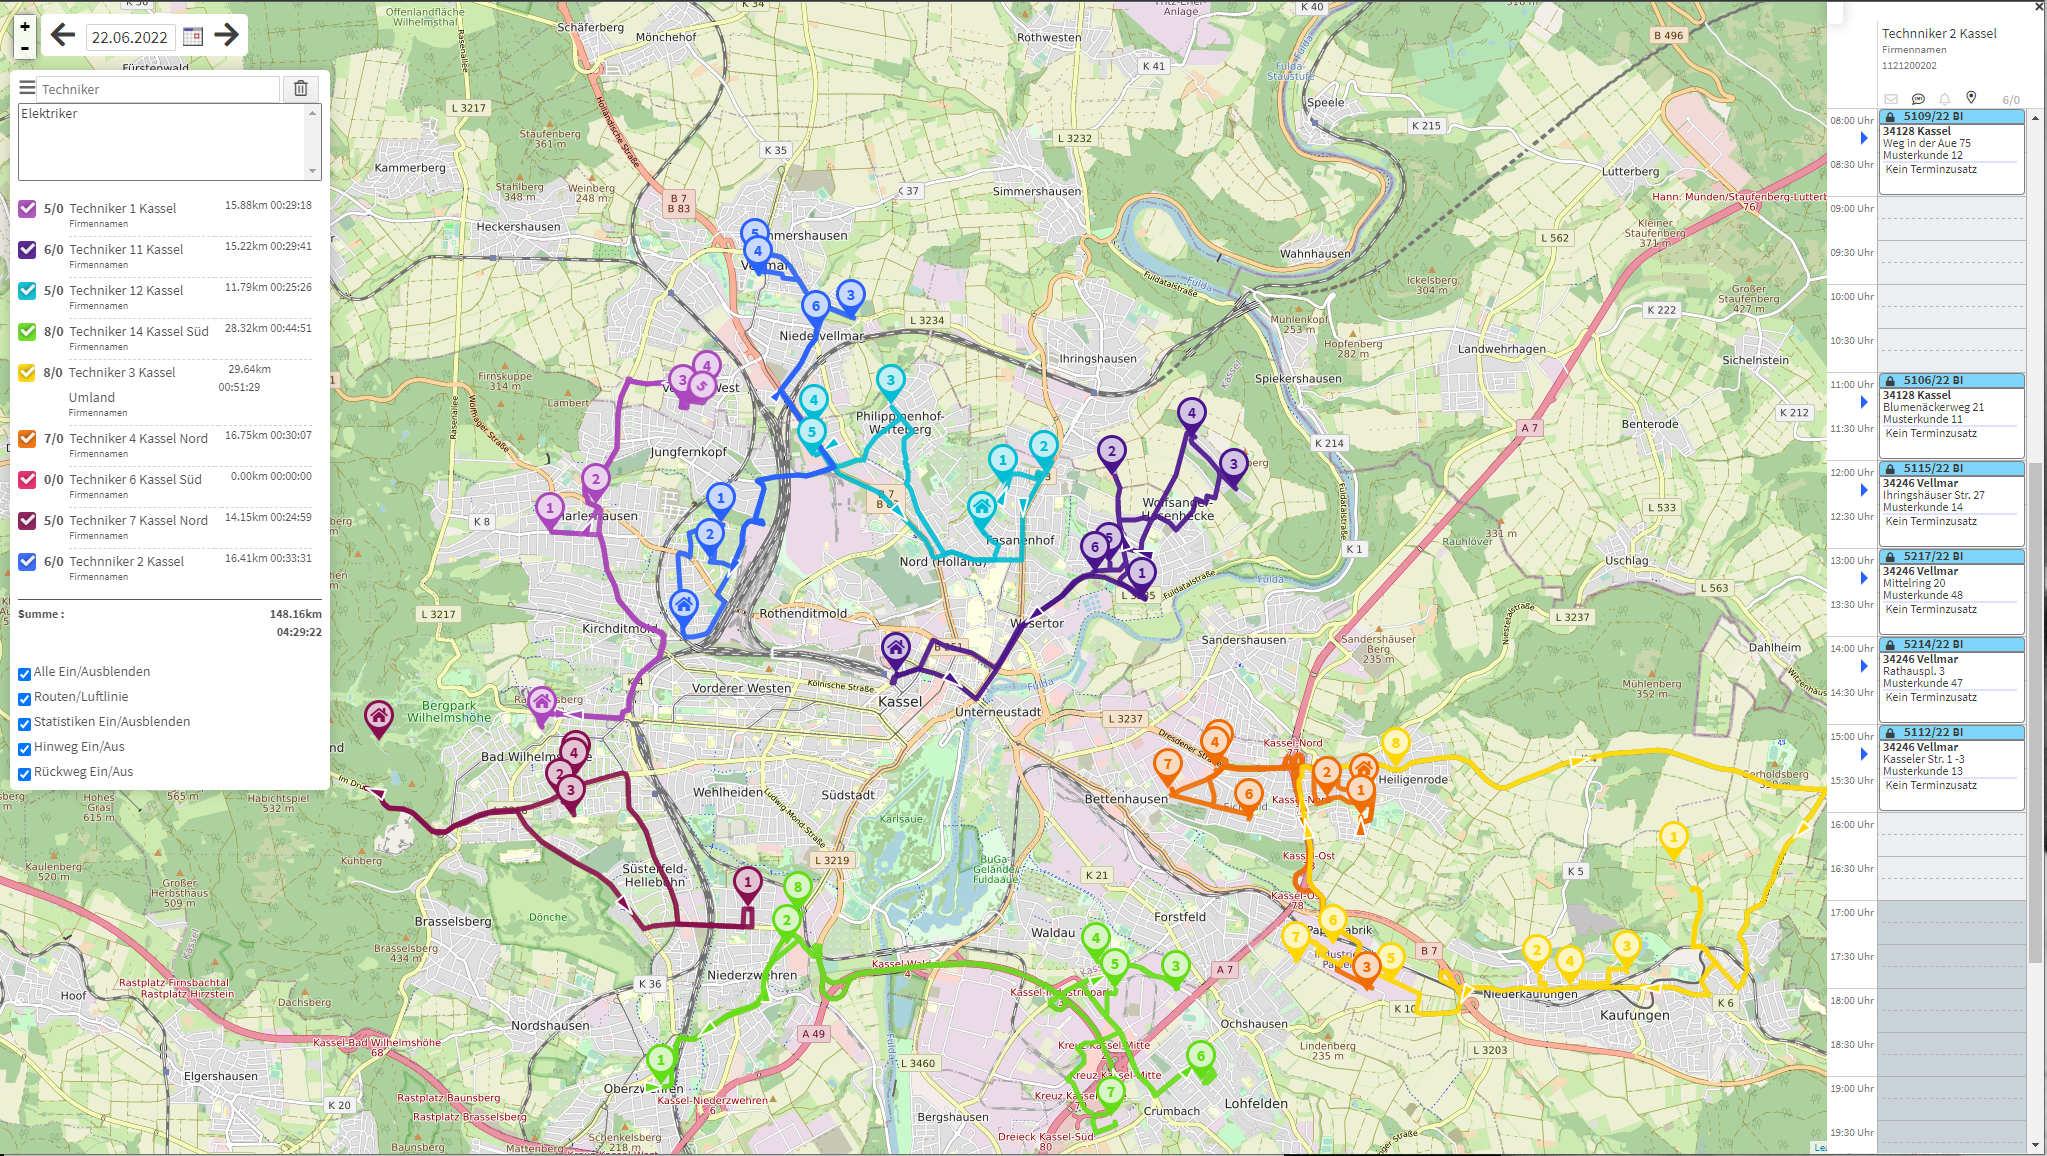 COMP4 - Maps, Routes, Calendar in one view